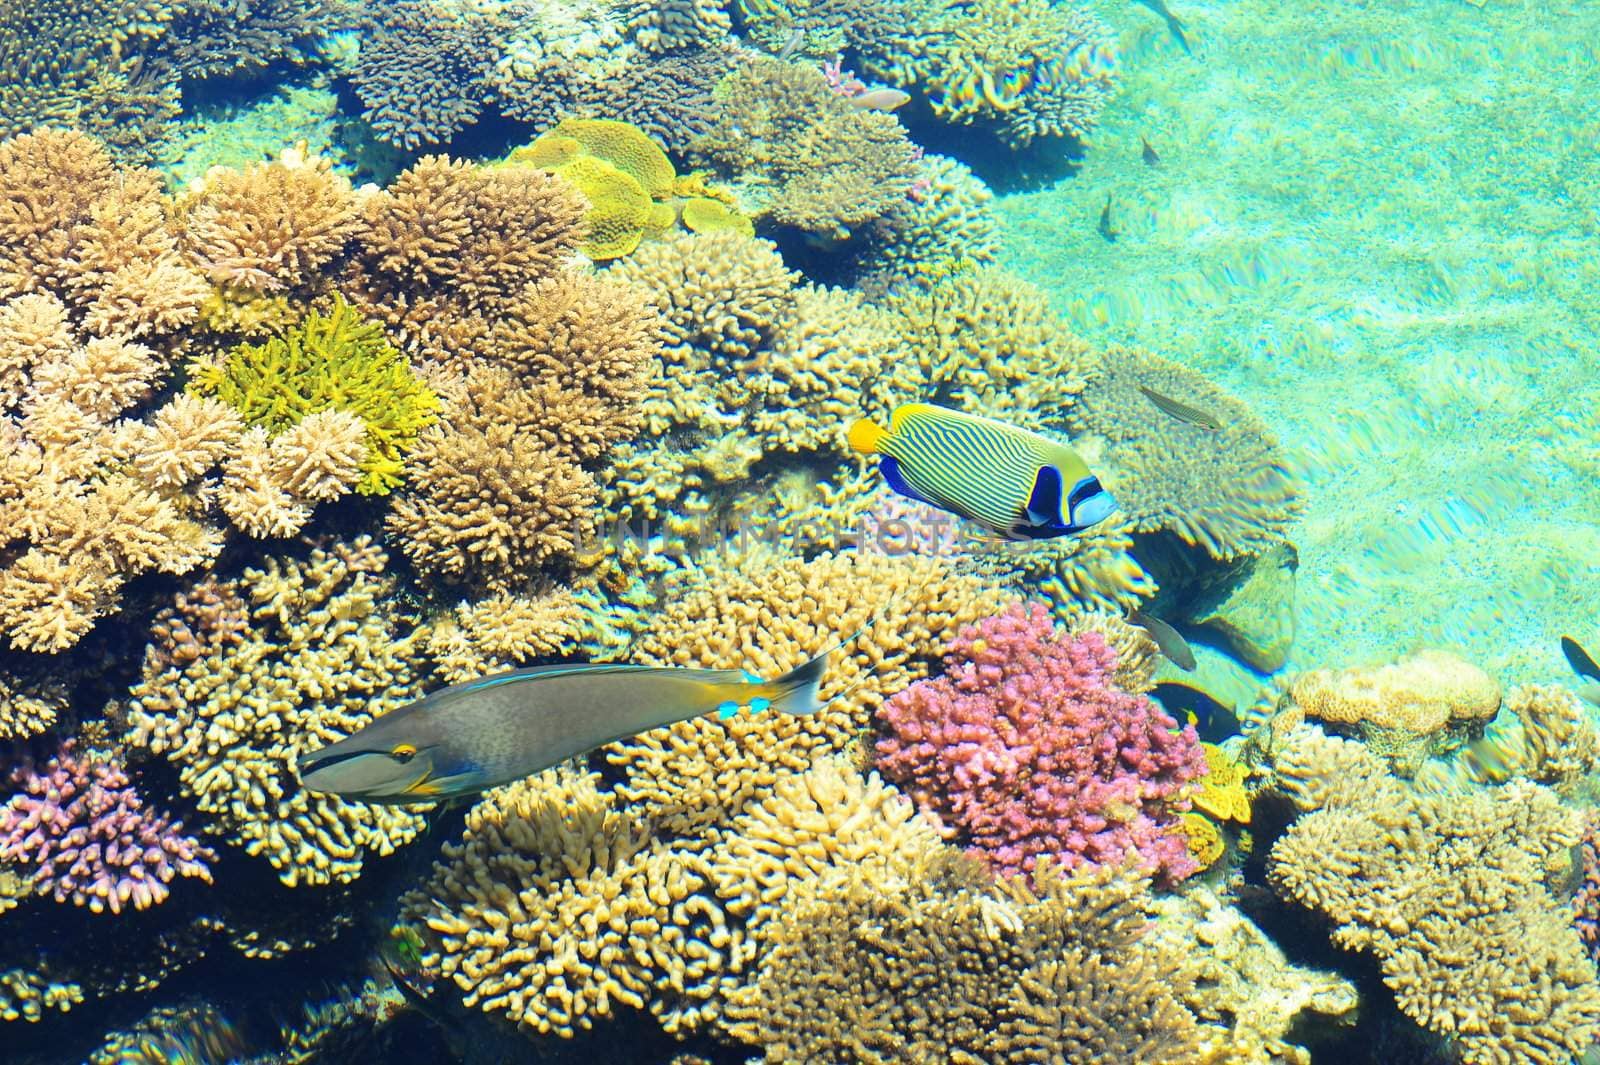 Coral Reef And Tropical Fish In Clear Water.